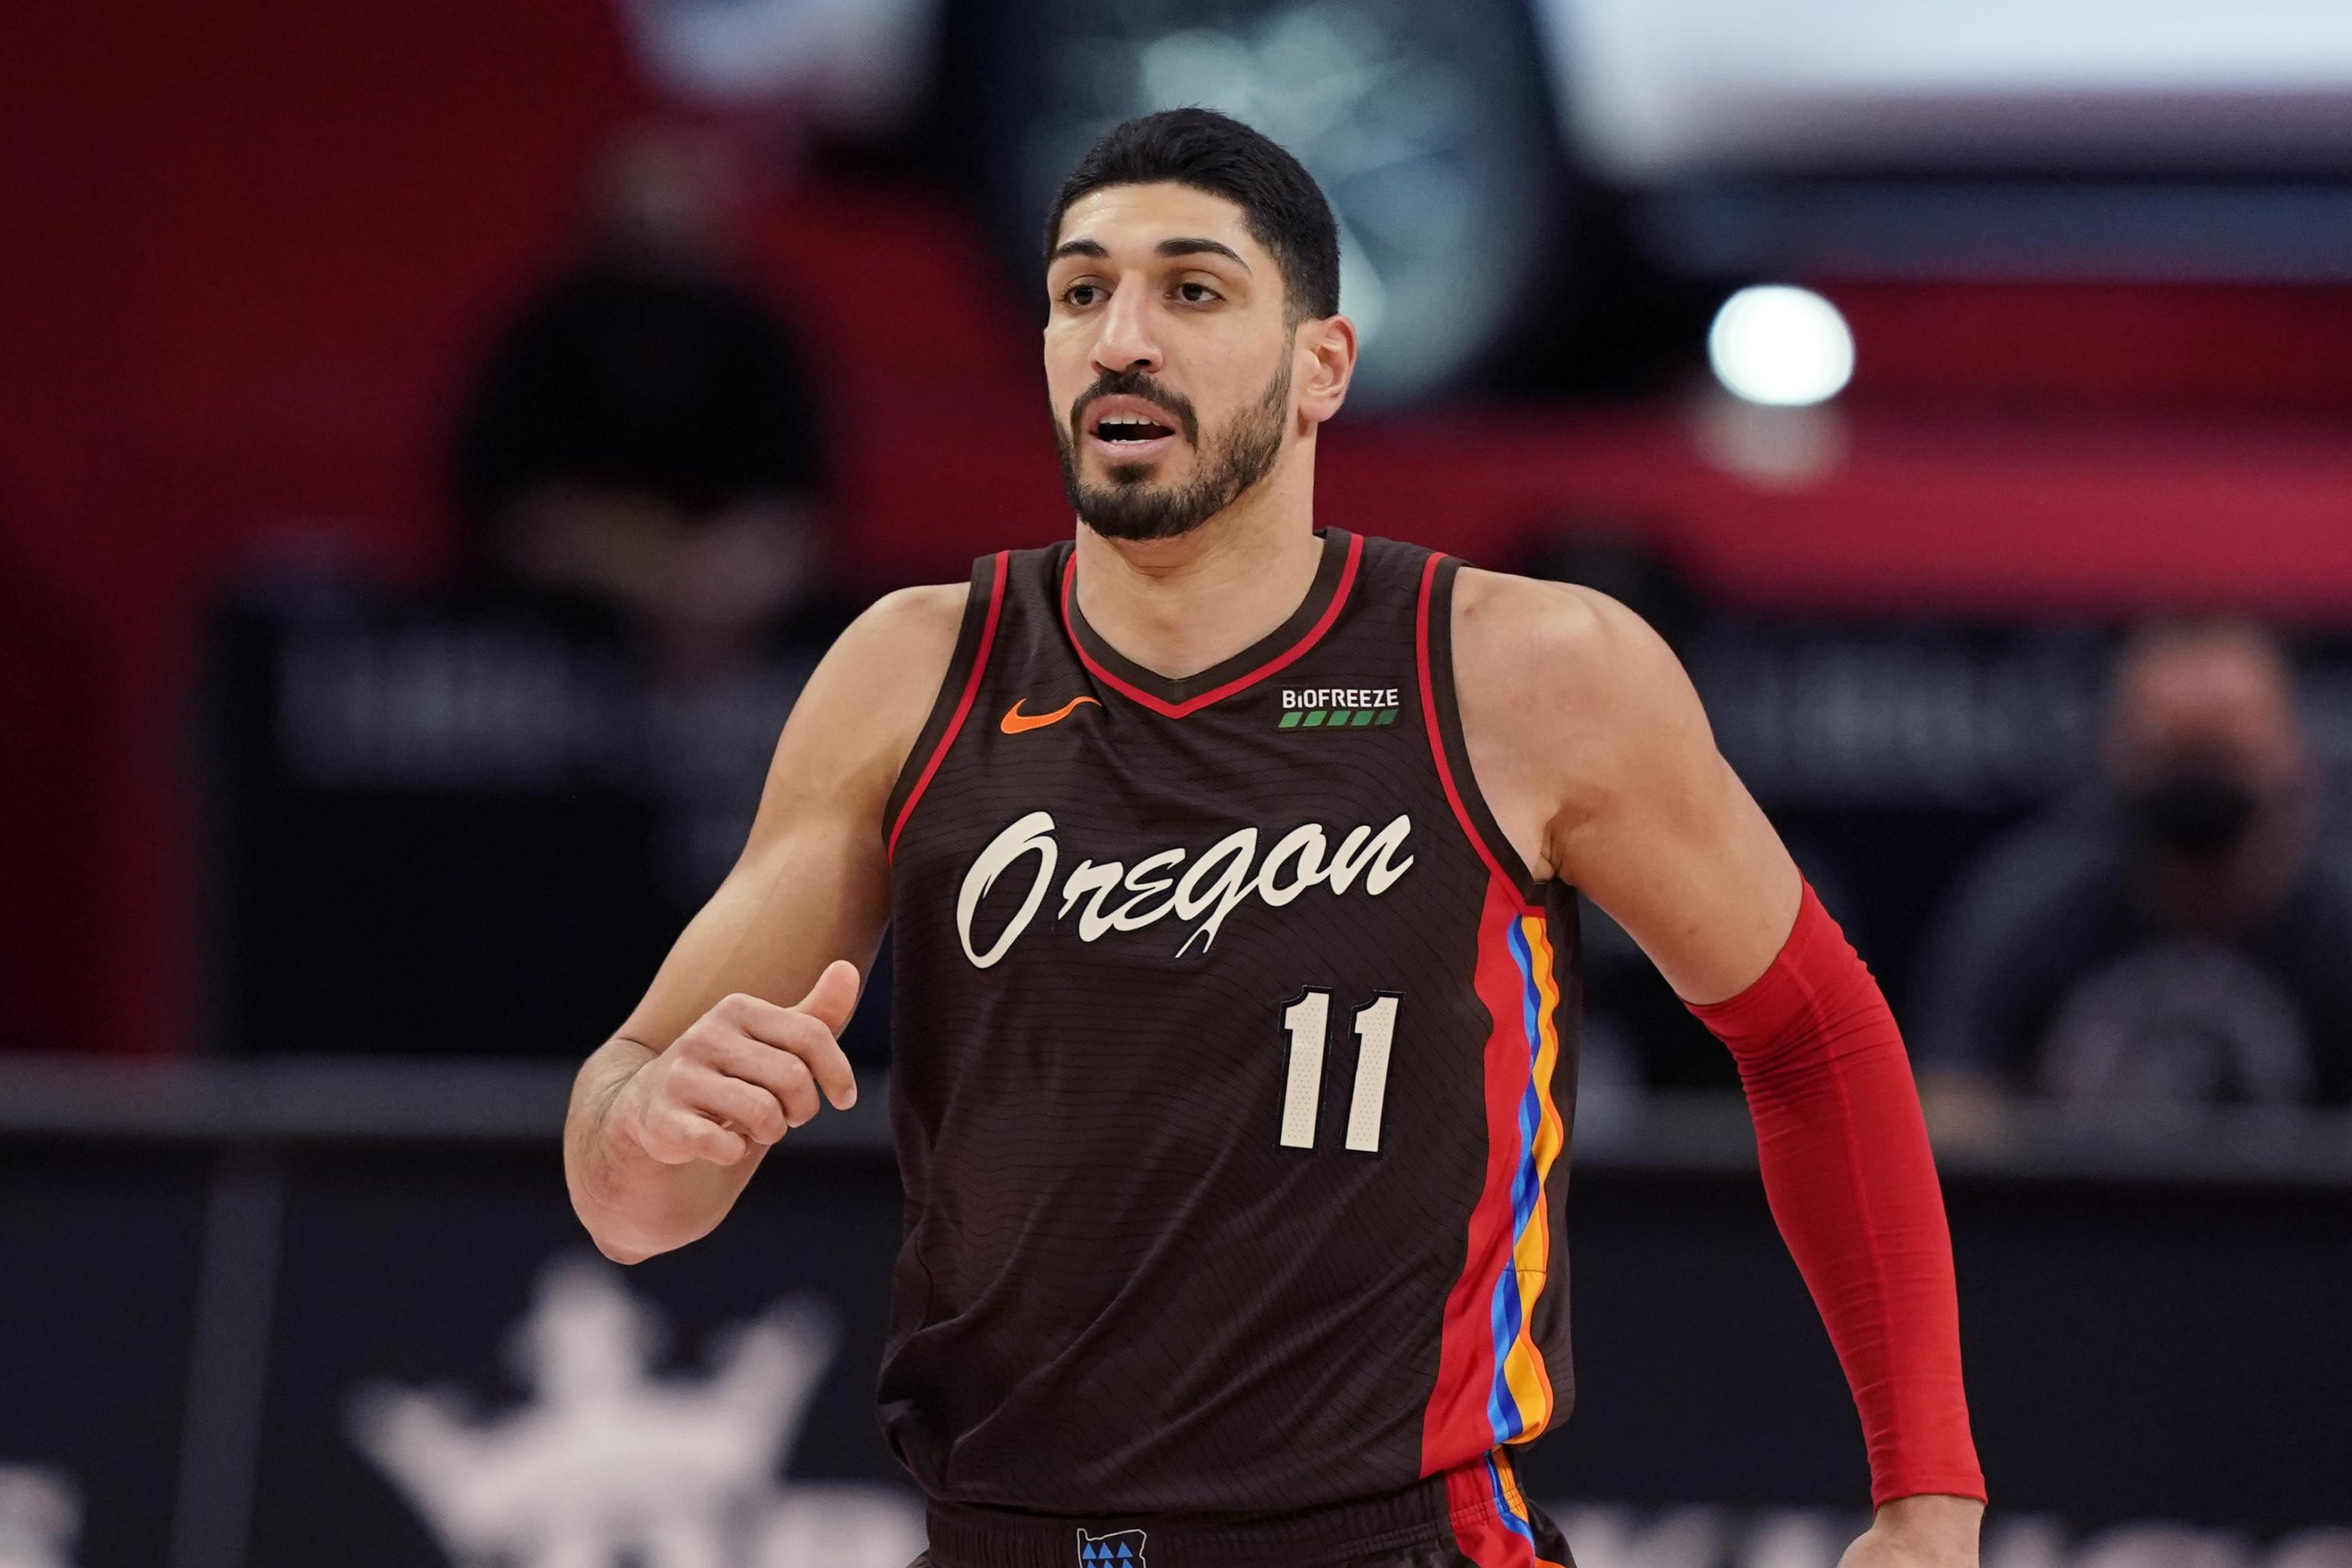 NBA star Enes Kanter's father is released from a Turkish prison after  'wrongful' terrorism charge